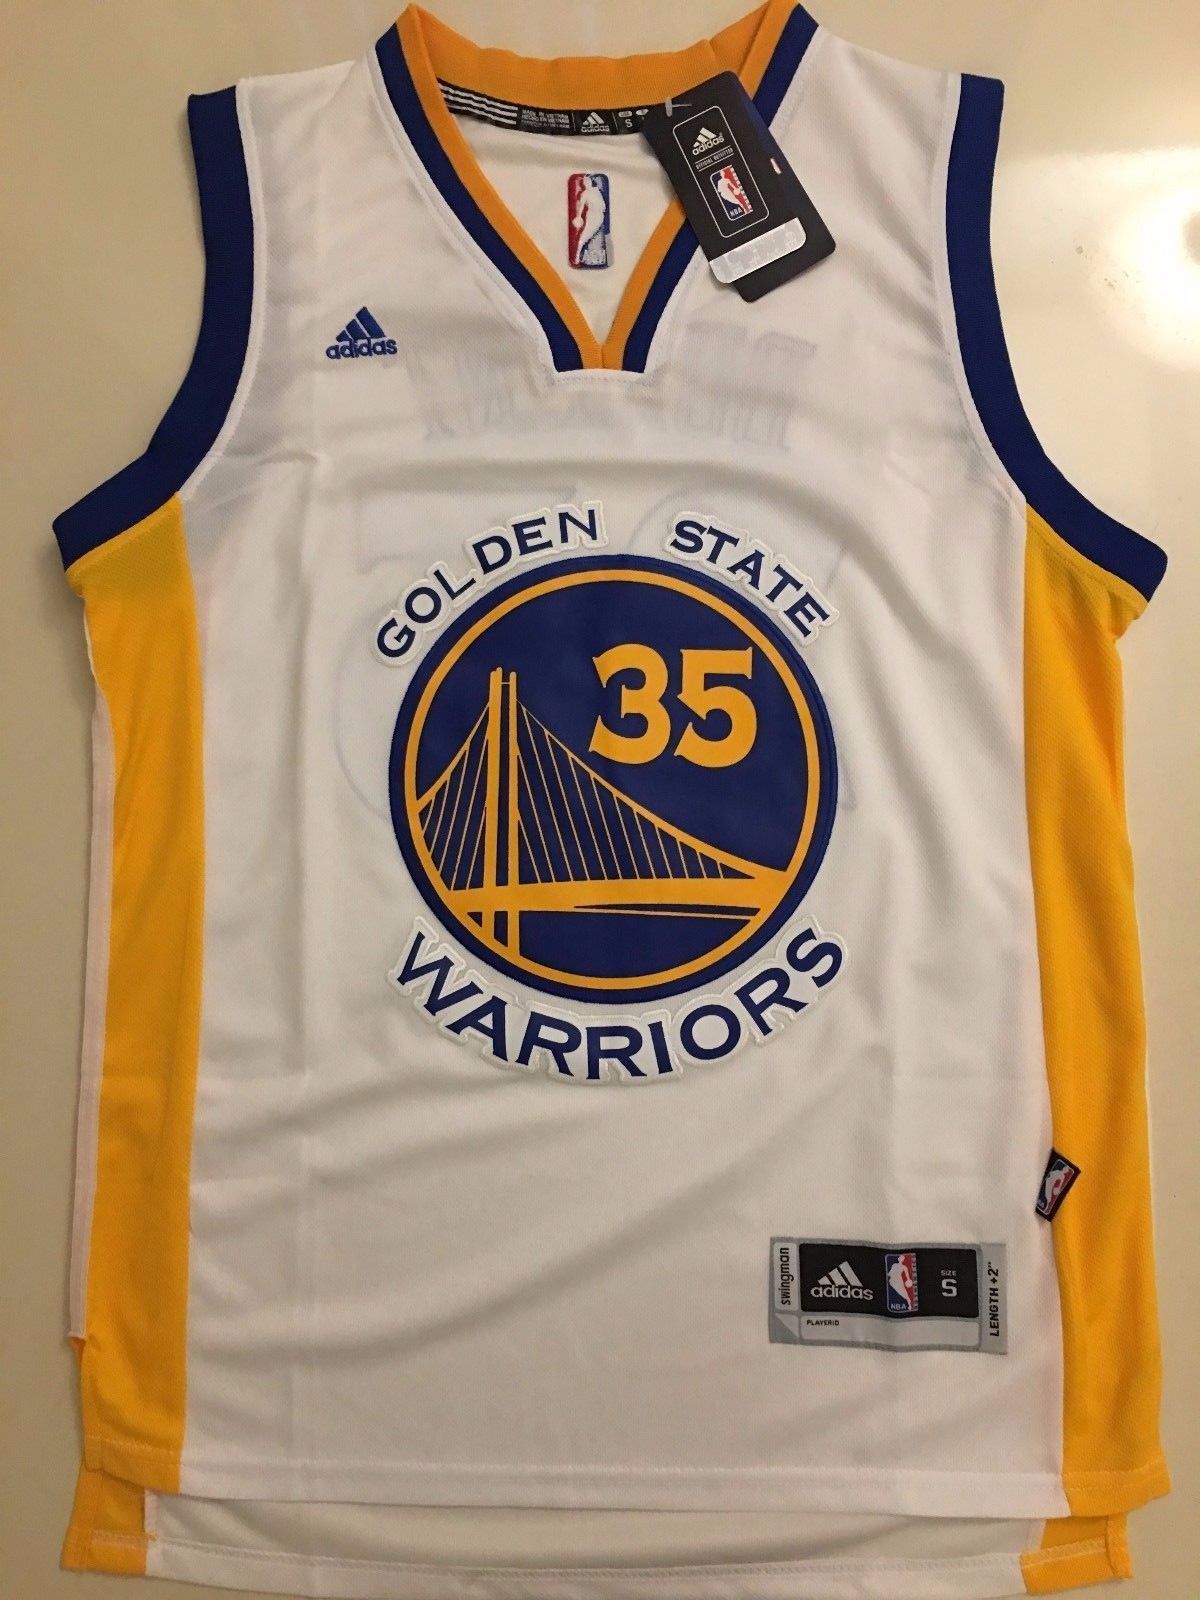 kevin durant in golden state jersey